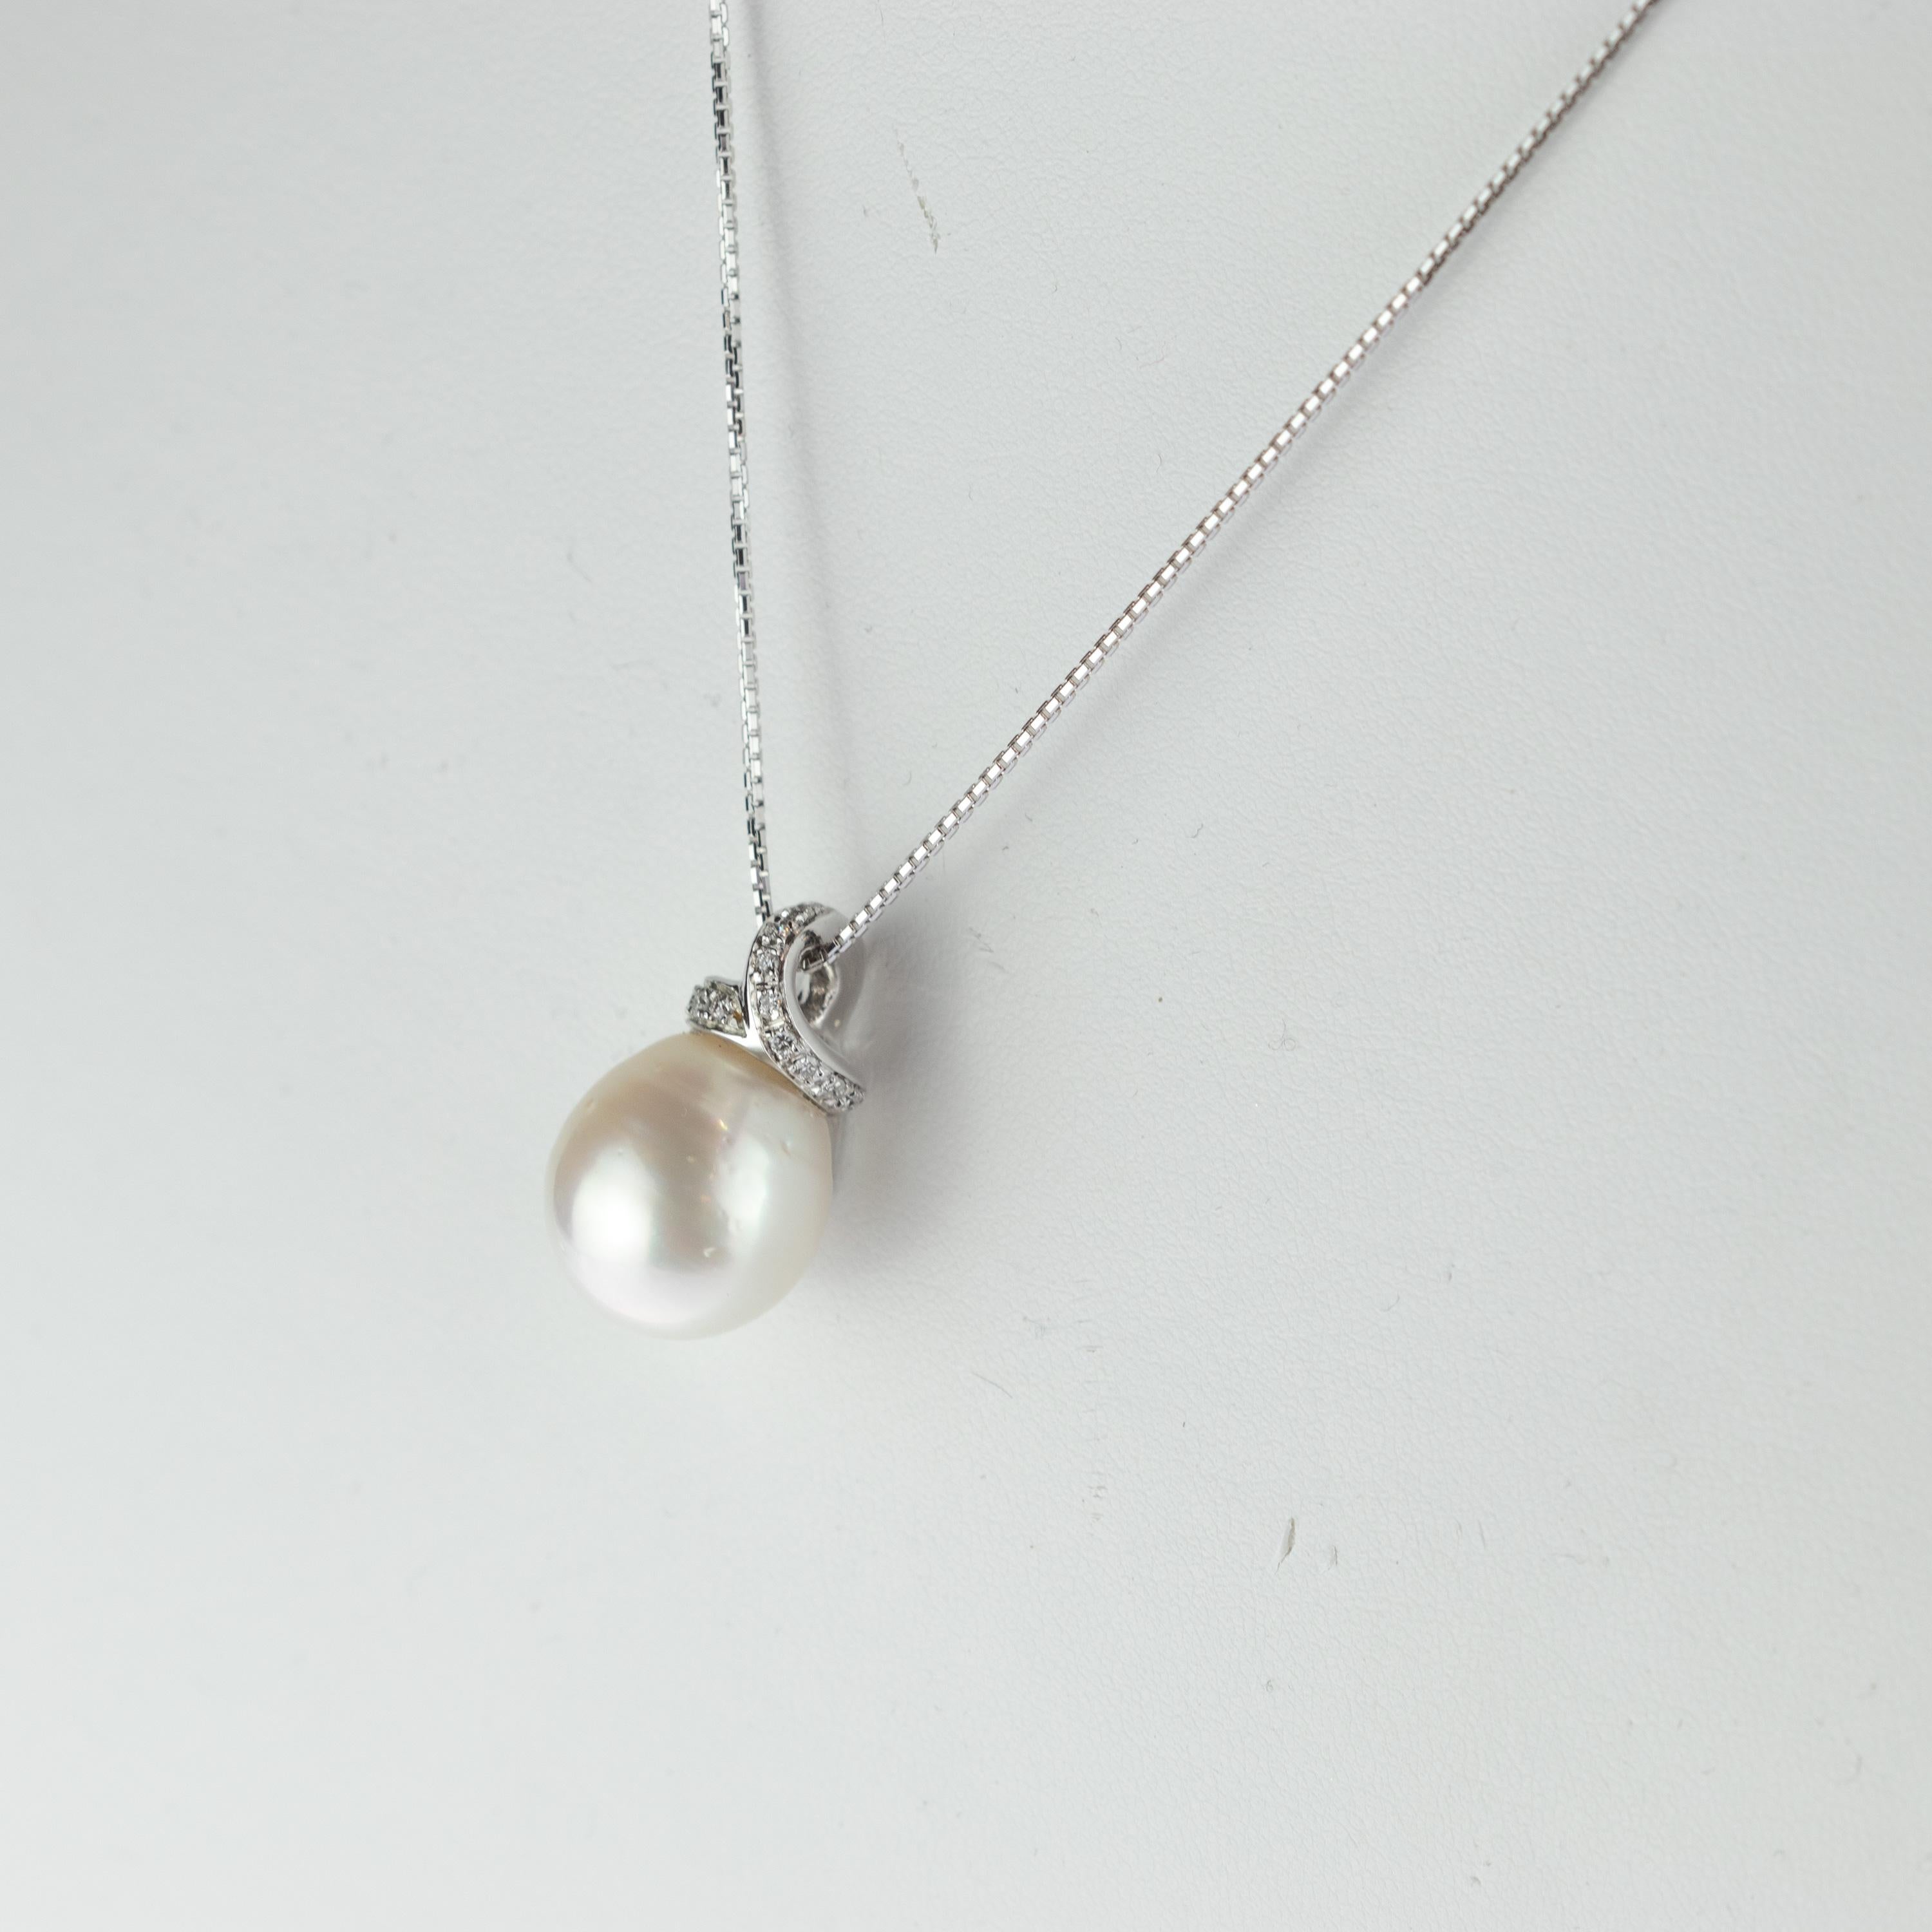 Romantic Intini Jewels Pearl Diamond Pendant 18 Karat White Gold Crafted Chain Necklace For Sale